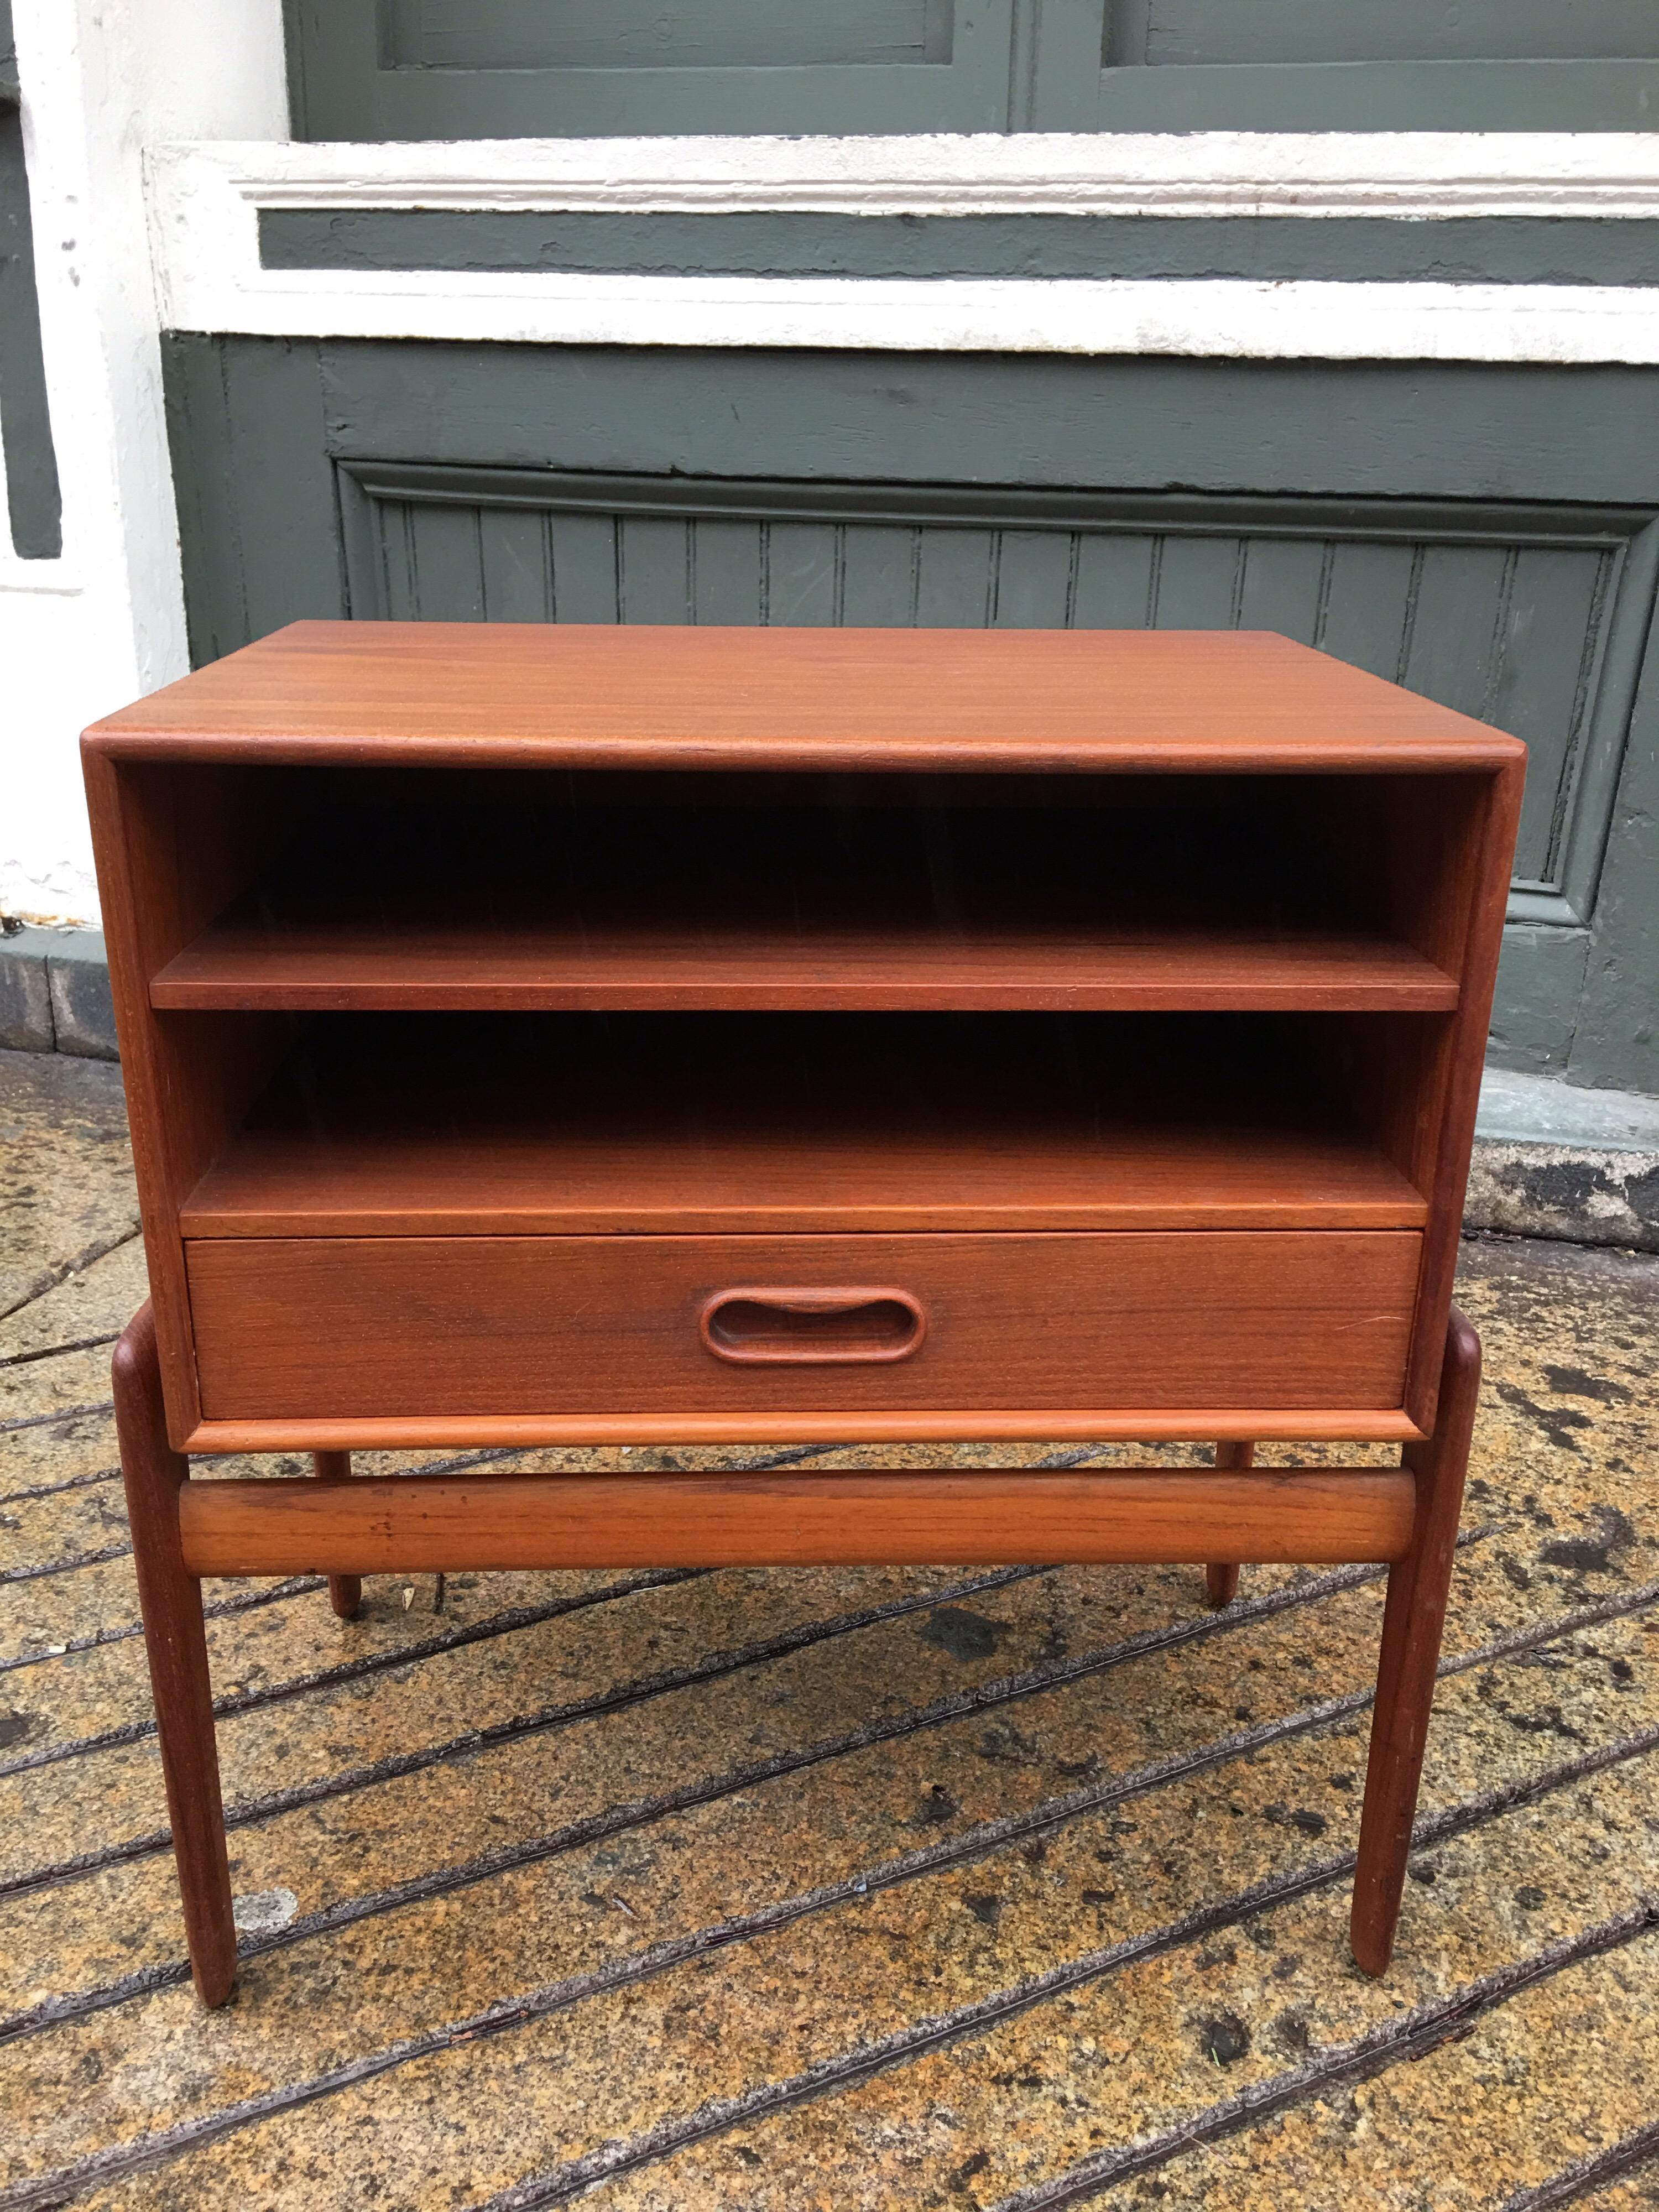 Arne Vodder teak night table or side table for Vamo Sonderborg. One drawer can be placed in 3 different positions. Nice original condition. Versatile piece that can be used in many settings.